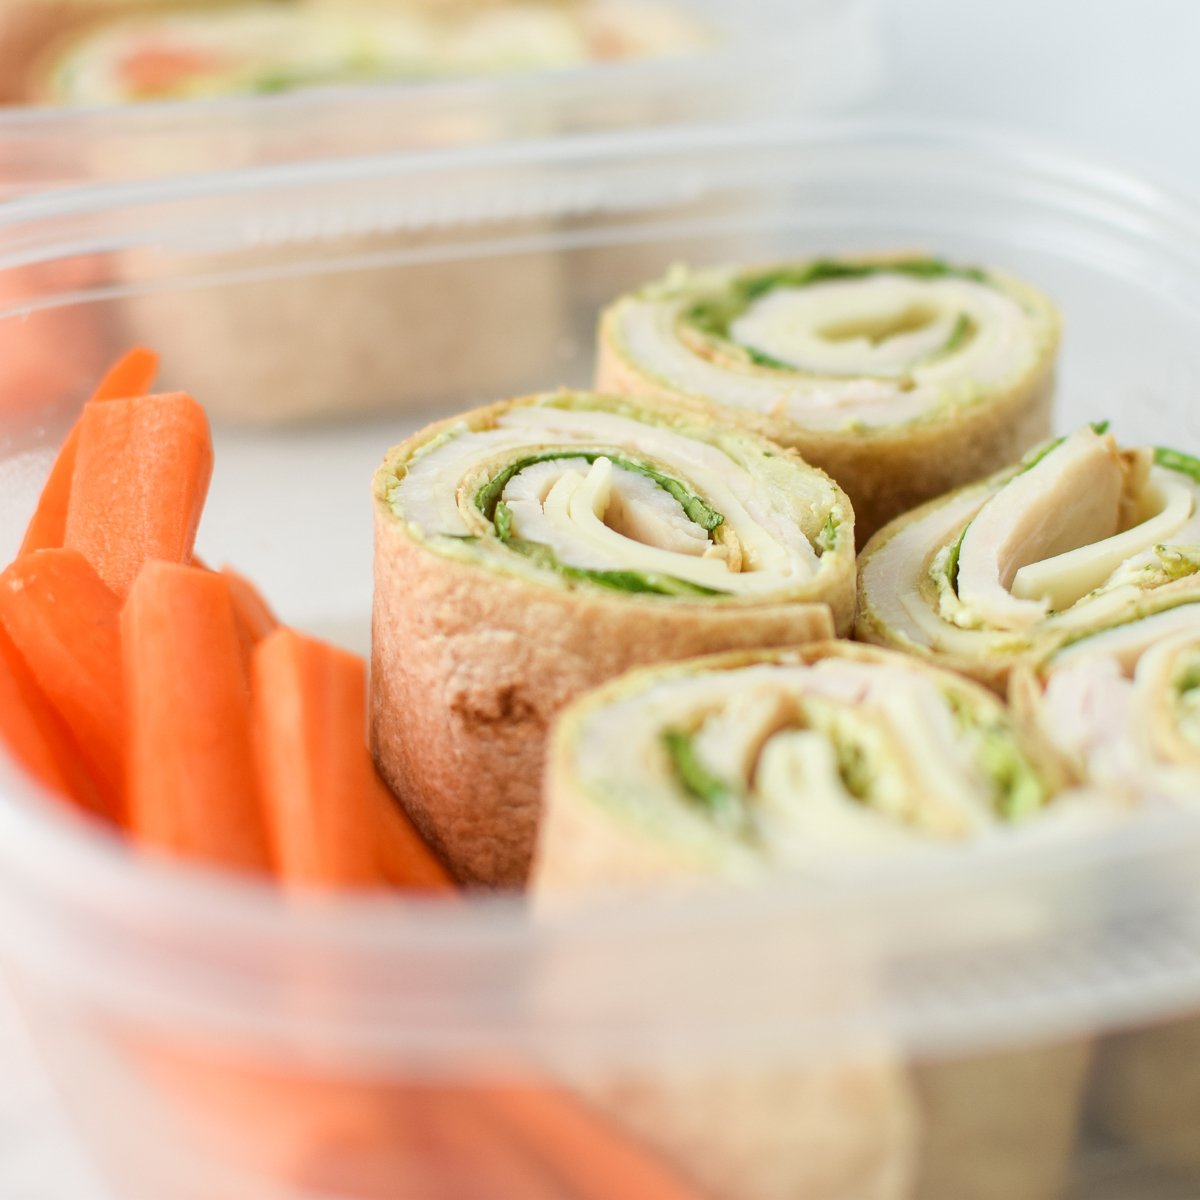 16 Make-Ahead Cold Lunch Ideas to Prep for Work This Week - Try prepping these awesome cold lunch ideas instead of reheating! - ProjectMealPlan.com